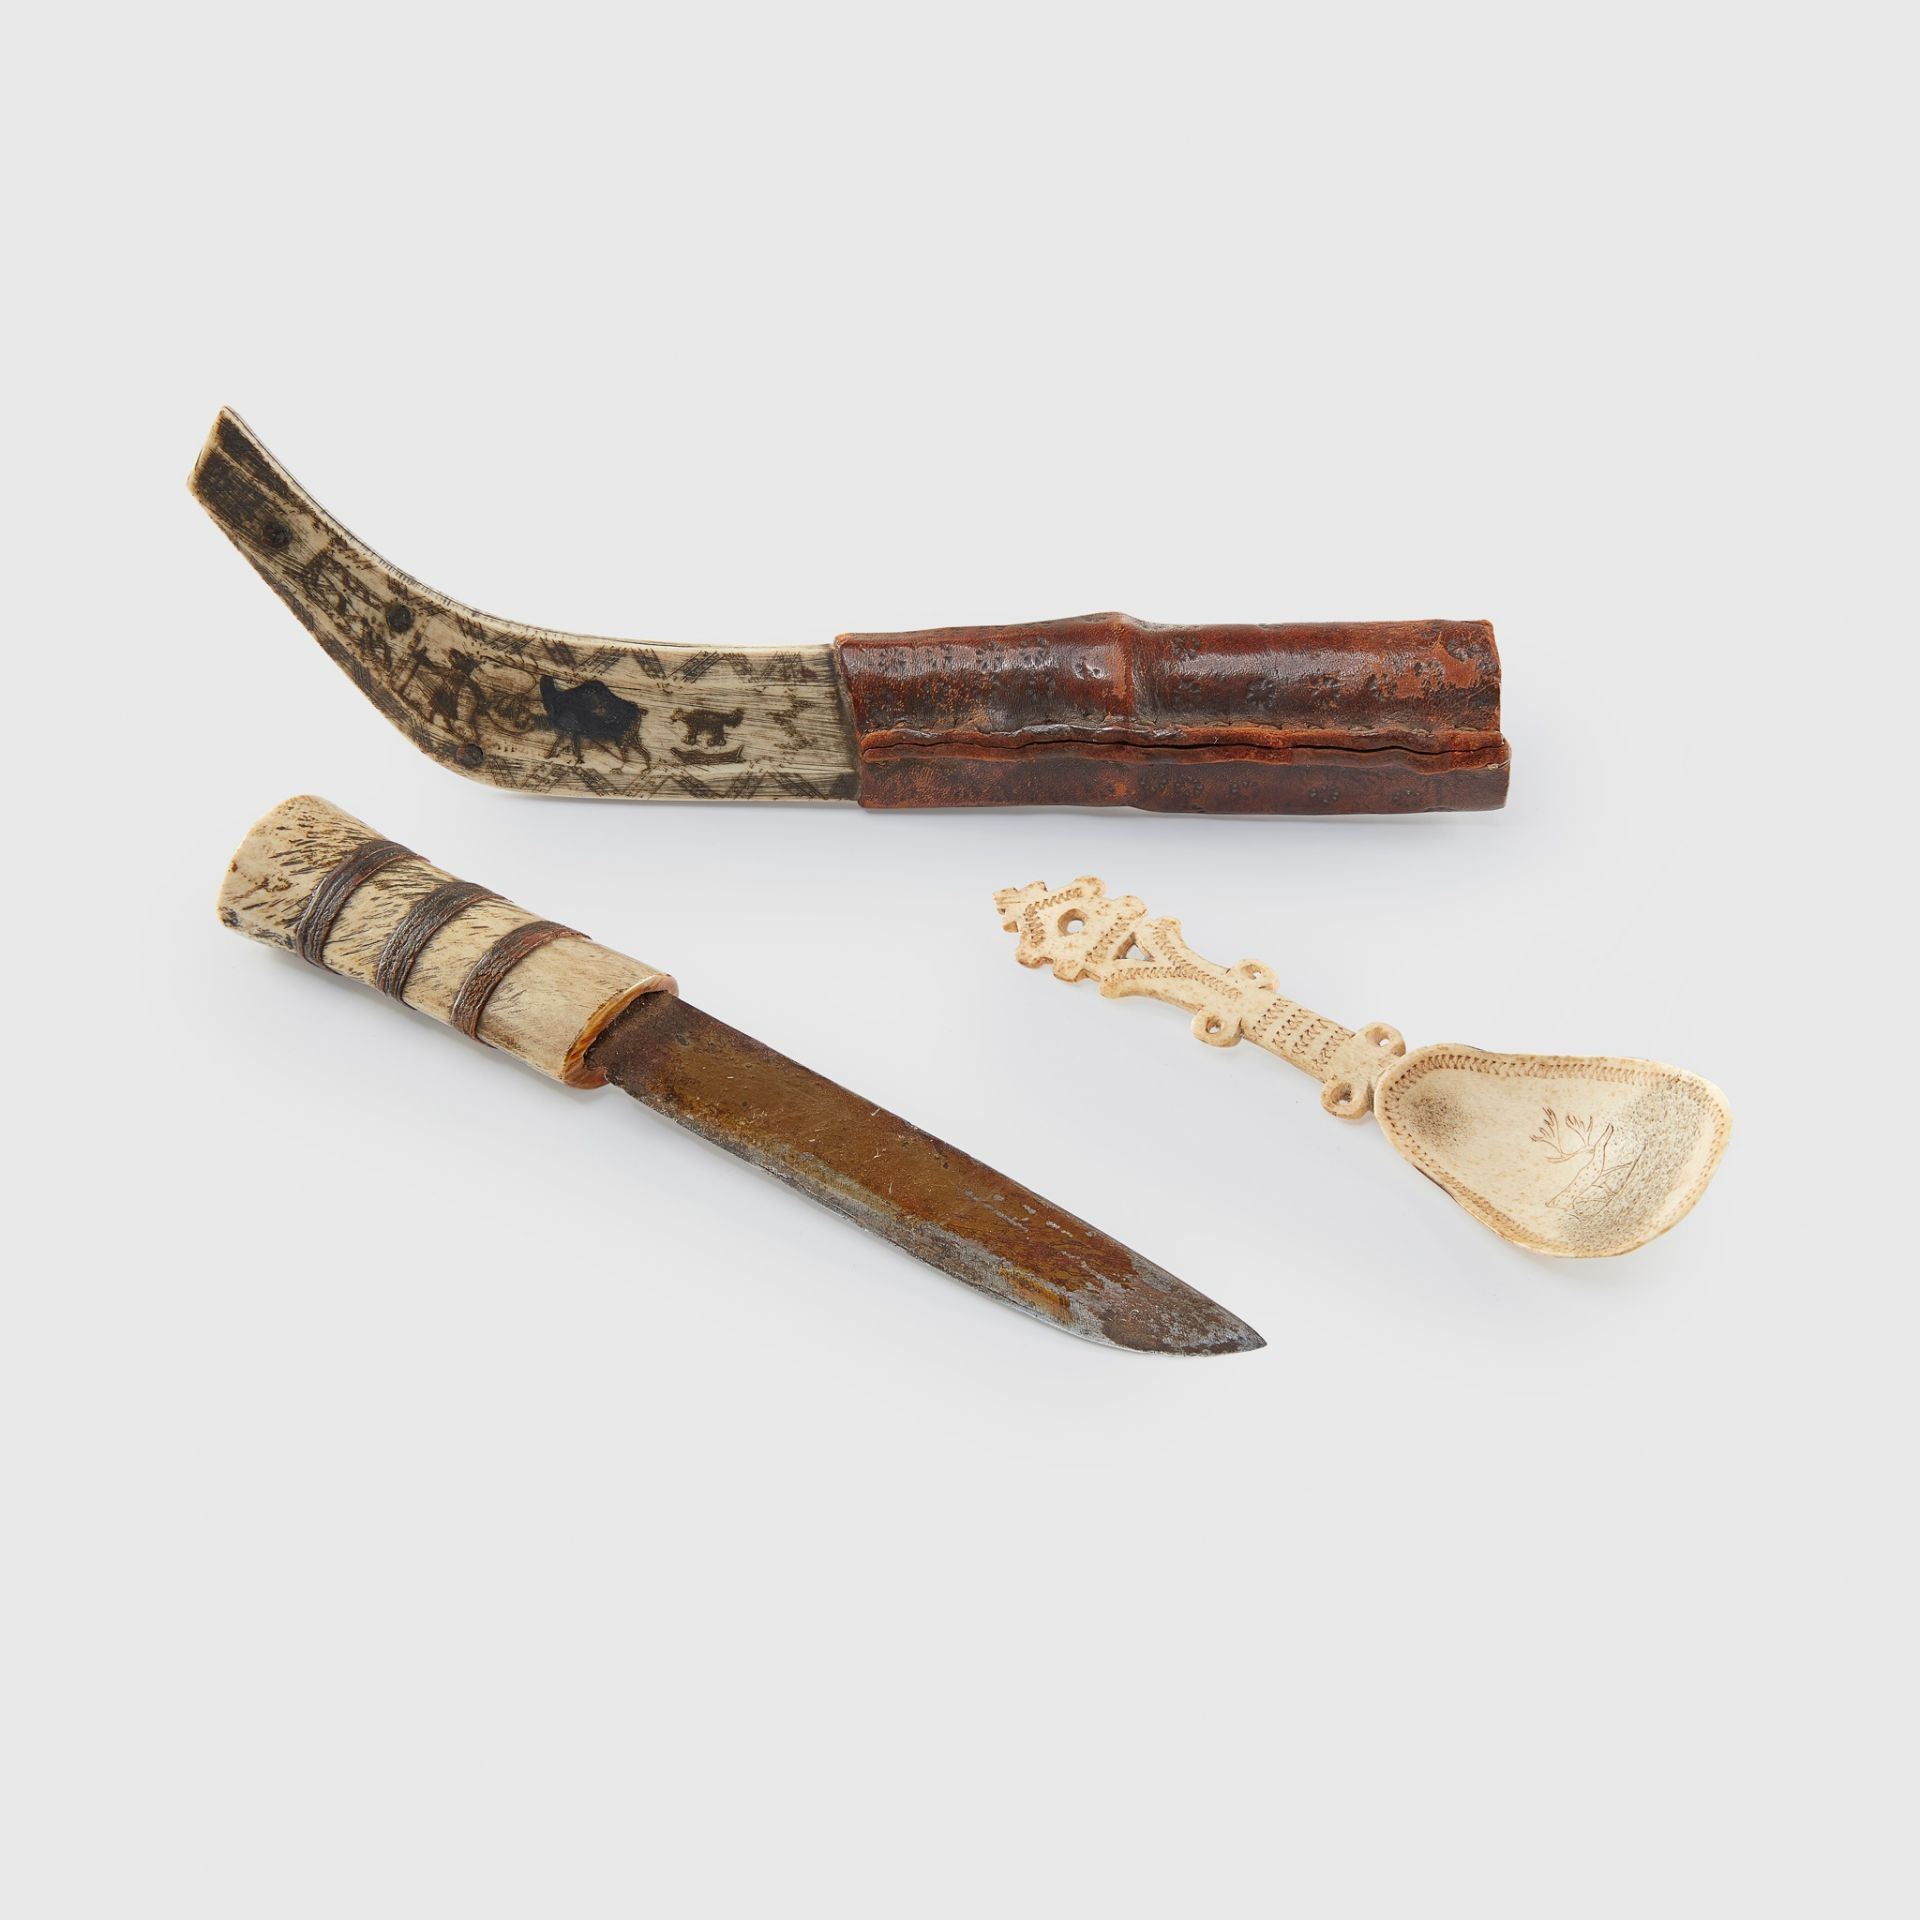 SAAMI KNIFE AND SPOON ARCTIC - Image 2 of 2